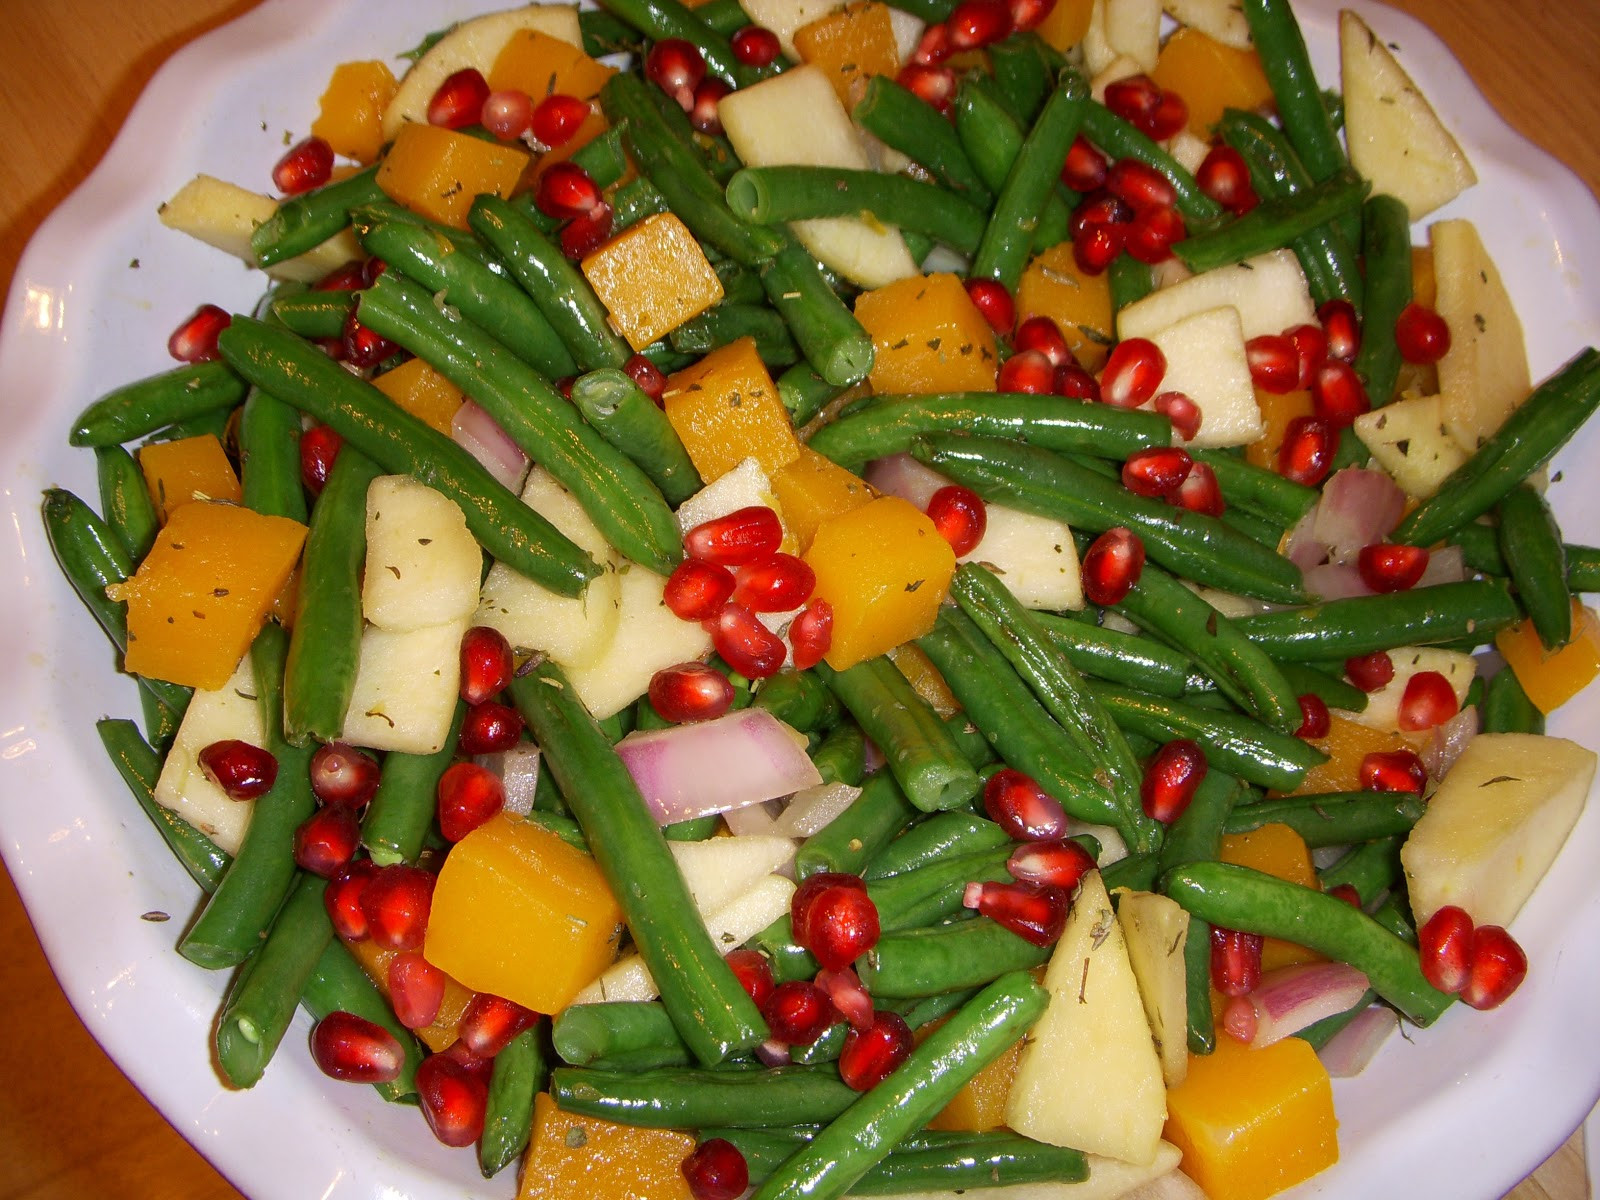 Vegetables Side Dishes For Christmas
 You Can t Eat What The Best Side to Fall For